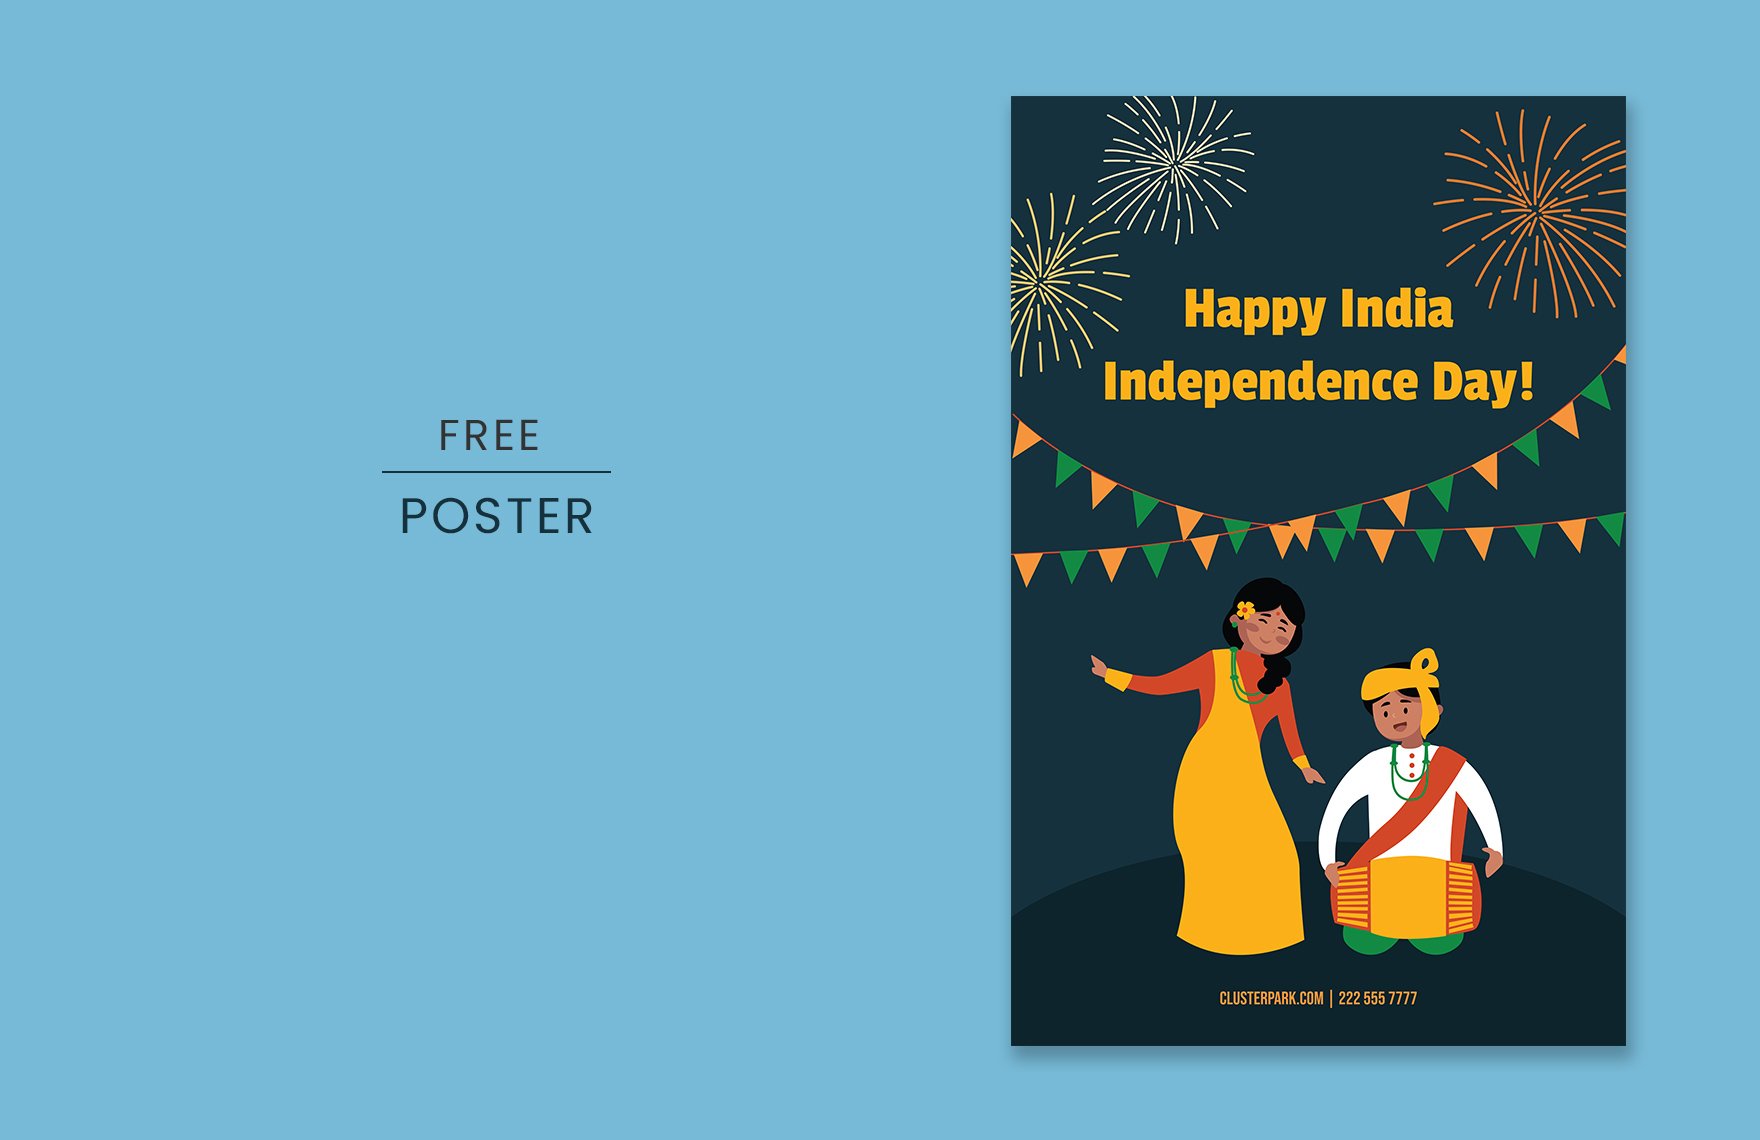 India Independence Day Poster Template in PDF, Illustrator, SVG, JPEG